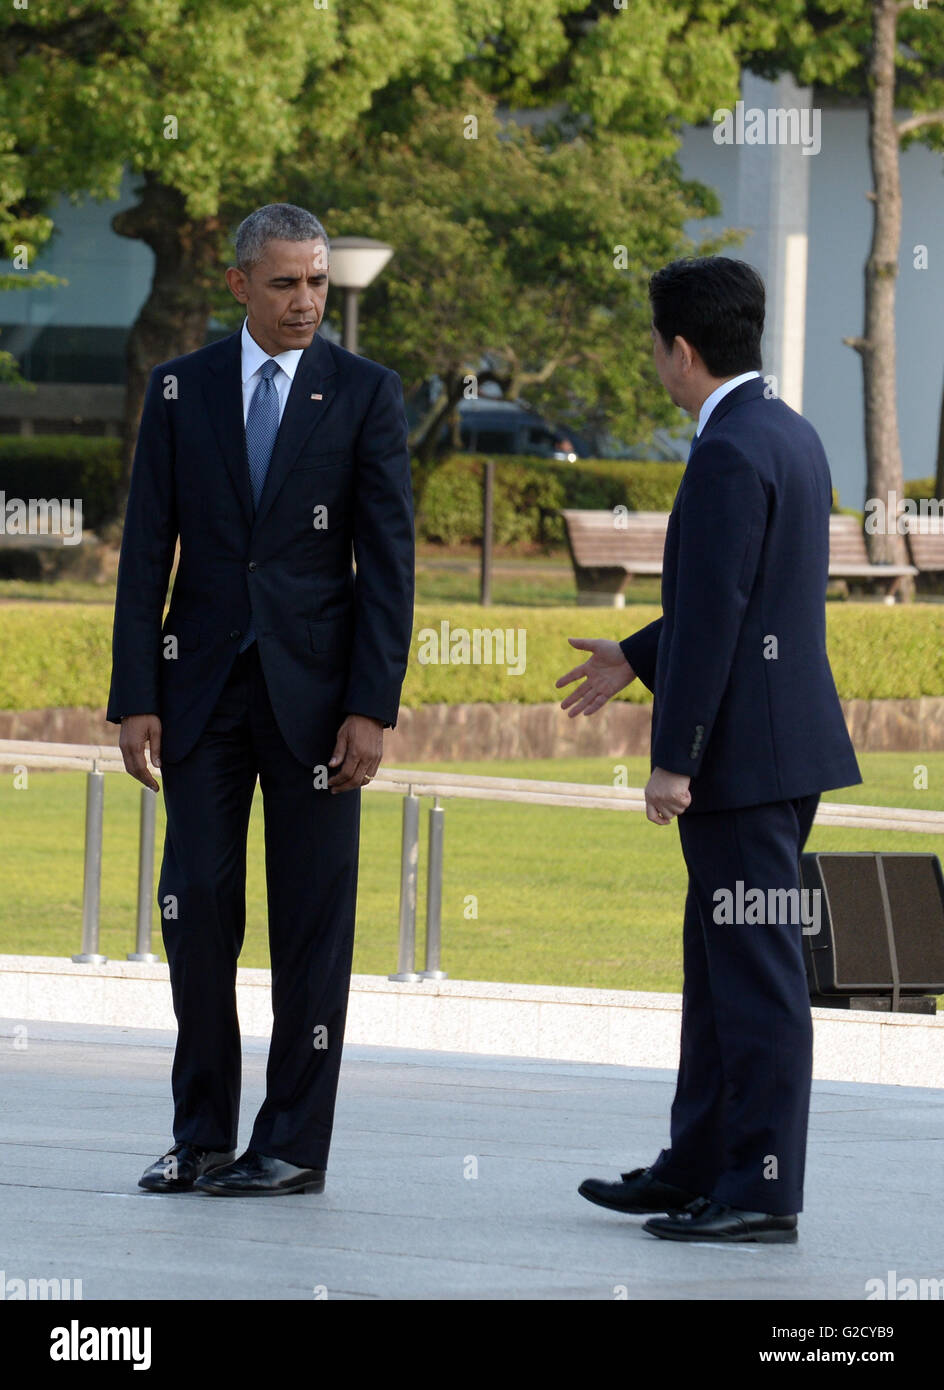 Hiroshima. 27th May, 2016. Japanese Prime Minister Shinzo Abe (R) and visiting President of the United States Barack Obama visit the Hiroshima Peace Memorial Park in Hiroshima, Japan on May 27, 2016. Barack Obama on Friday became the first incumbent U.S. president to visit Hiroshima since America dropped an atomic bomb on the city 71 years ago, stirring mixed feelings among the United States, Japan and the victim countries during WWII. © Ma Ping/Xinhua/Alamy Live News Stock Photo